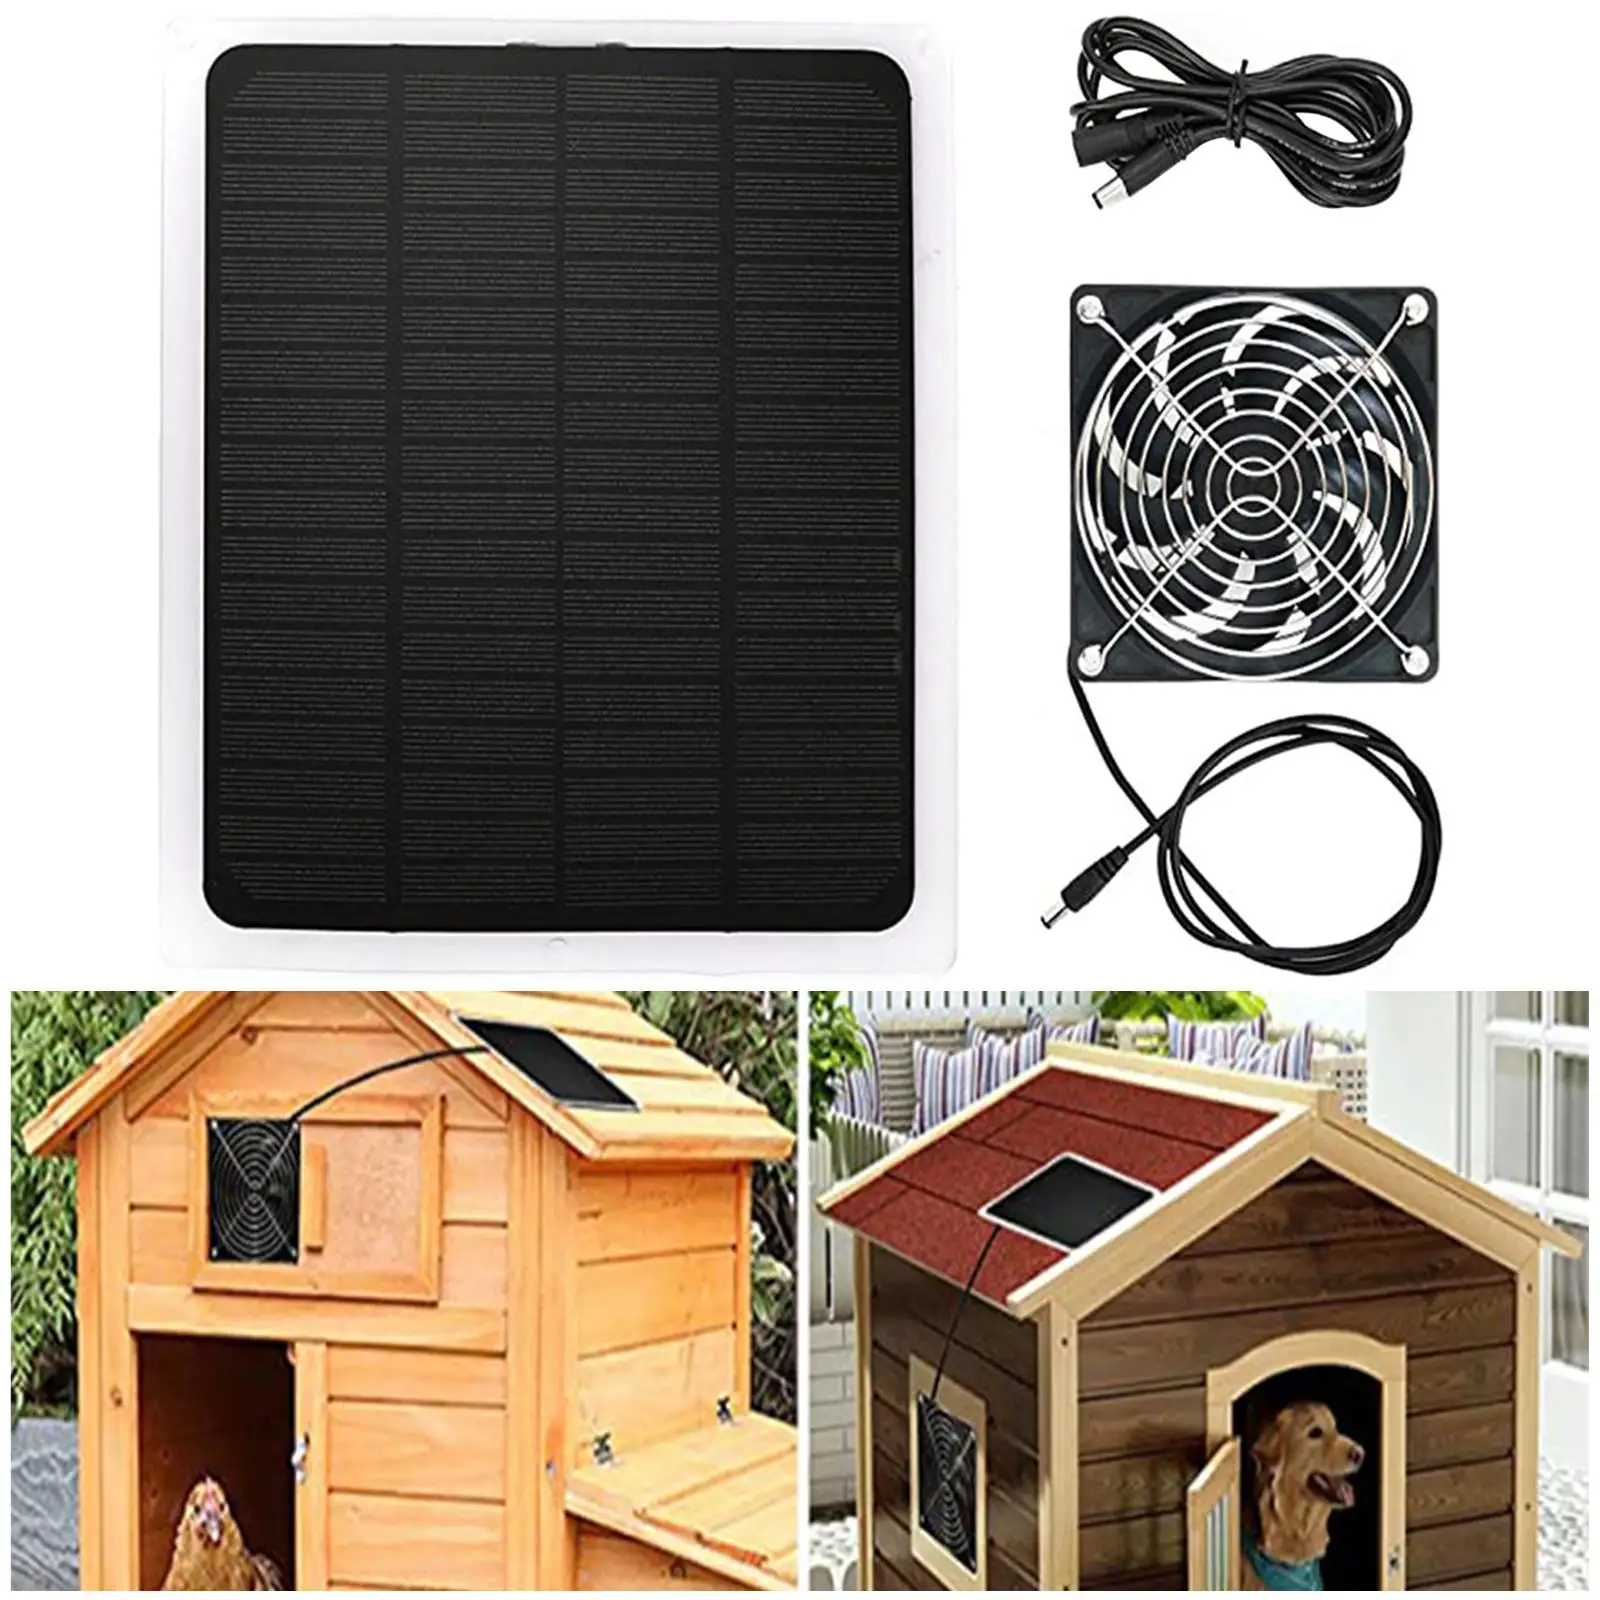 

Portable Solar Powered Fan Kit Extractor Fan Air Ventilator Solar Panel Exhaust Fan for Chicken Coop Poultry House Shed Roofs RV